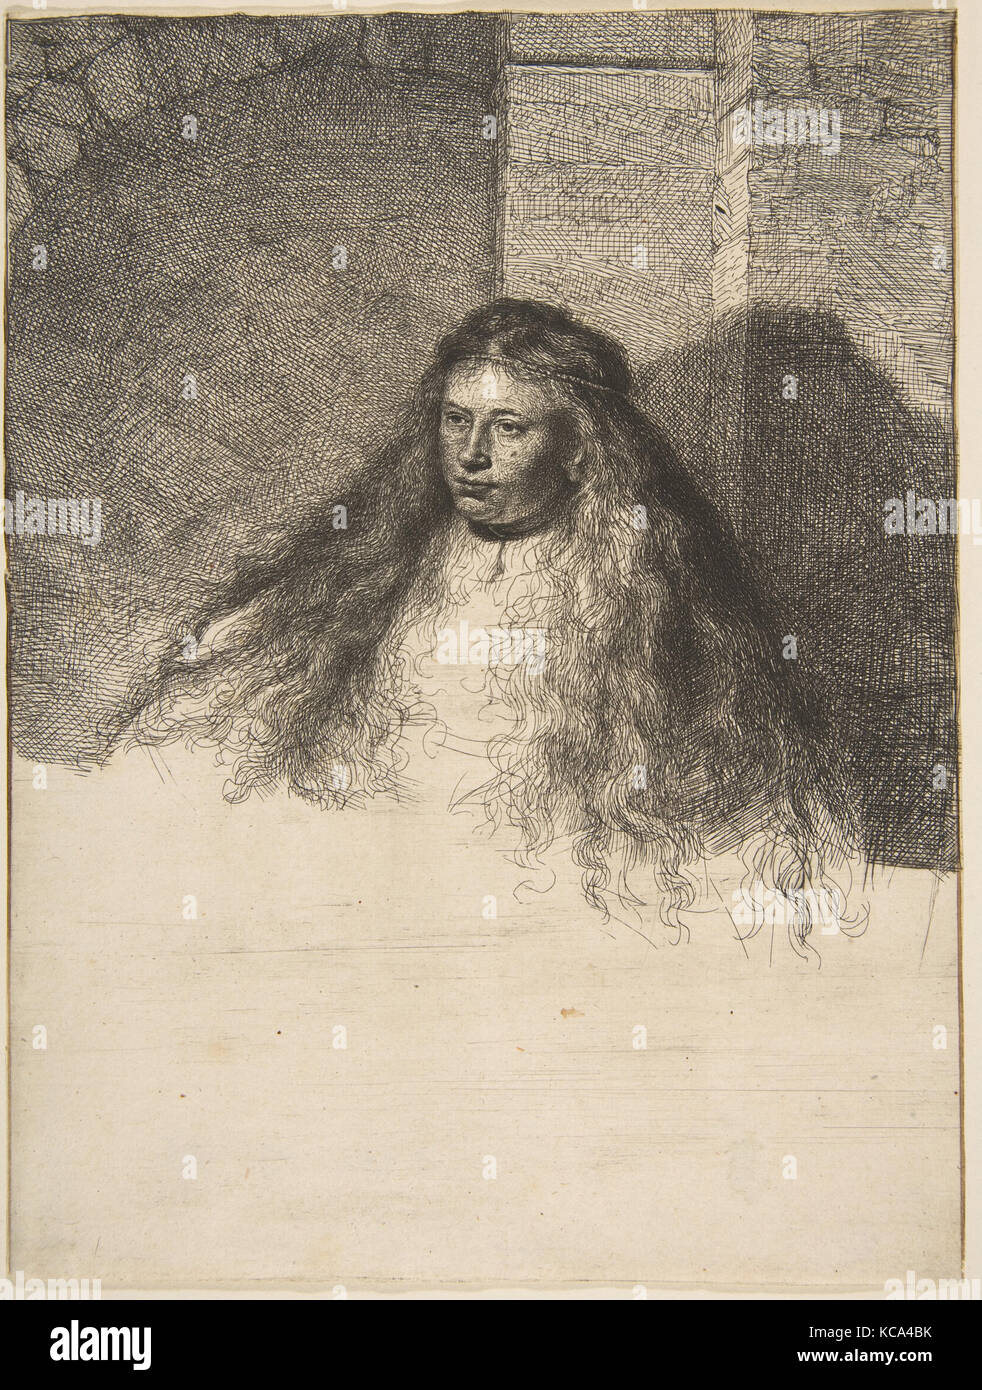 The Great Jewish Bride, 1635, Etching; second state of five, sheet: 8 9/16 x 6 7/16 in. (21.8 x 16.4 cm), Prints, Rembrandt Stock Photo